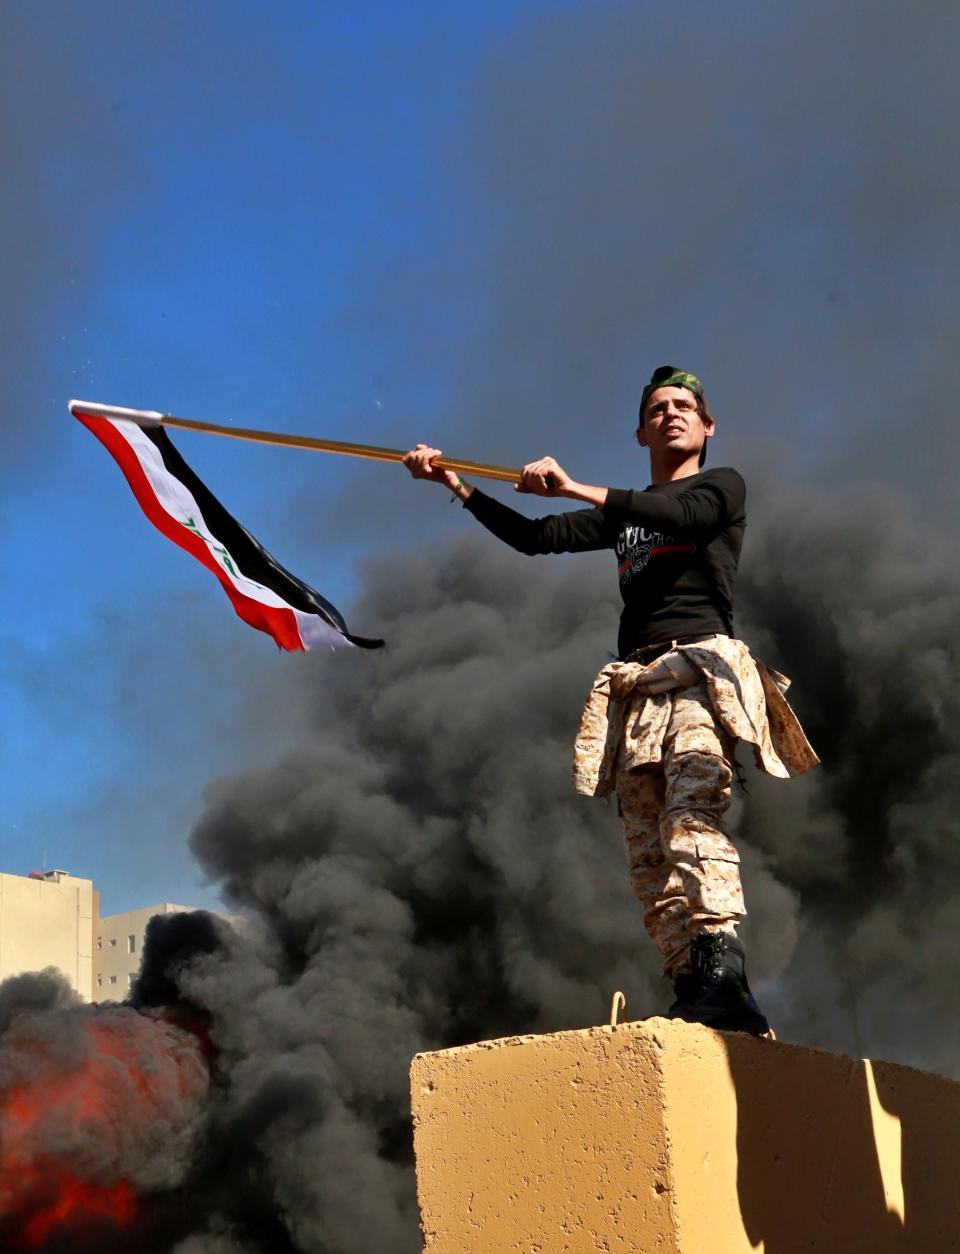 Protesters burn property as a militiaman waves an Iraqi flag in front of the U.S. embassy compound, in Baghdad, Iraq, Tuesday, Dec. 31, 2019. Dozens of angry Iraqi Shiite militia supporters broke into the U.S. Embassy compound in Baghdad on Tuesday after smashing a main door and setting fire to a reception area, prompting tear gas and sounds of gunfire. (AP Photo/Khalid Mohammed)